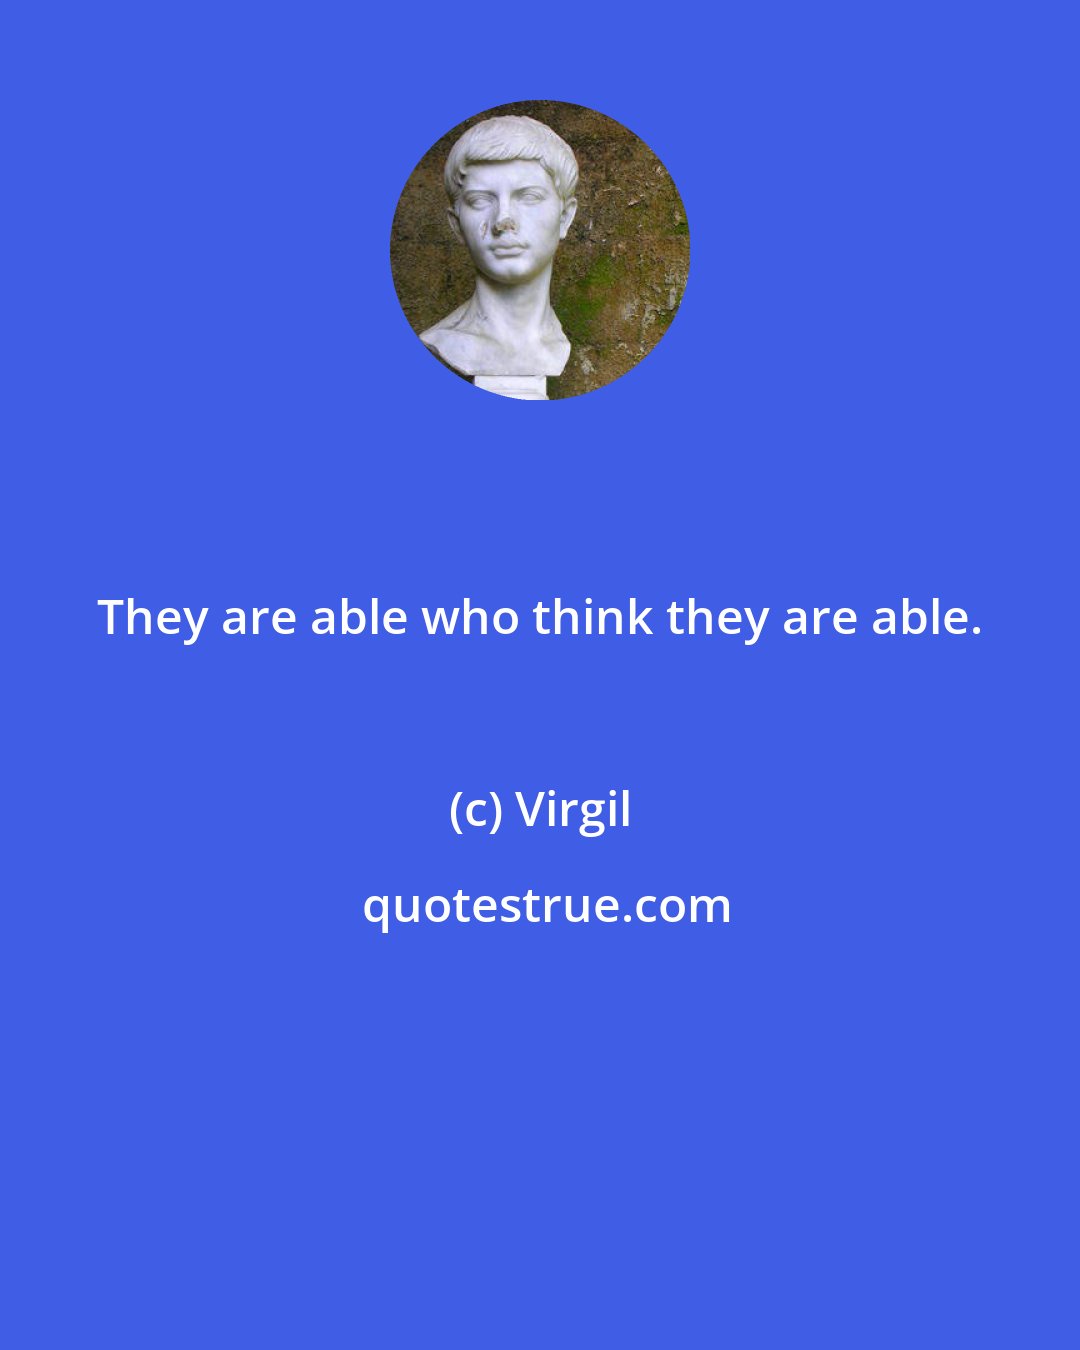 Virgil: They are able who think they are able.